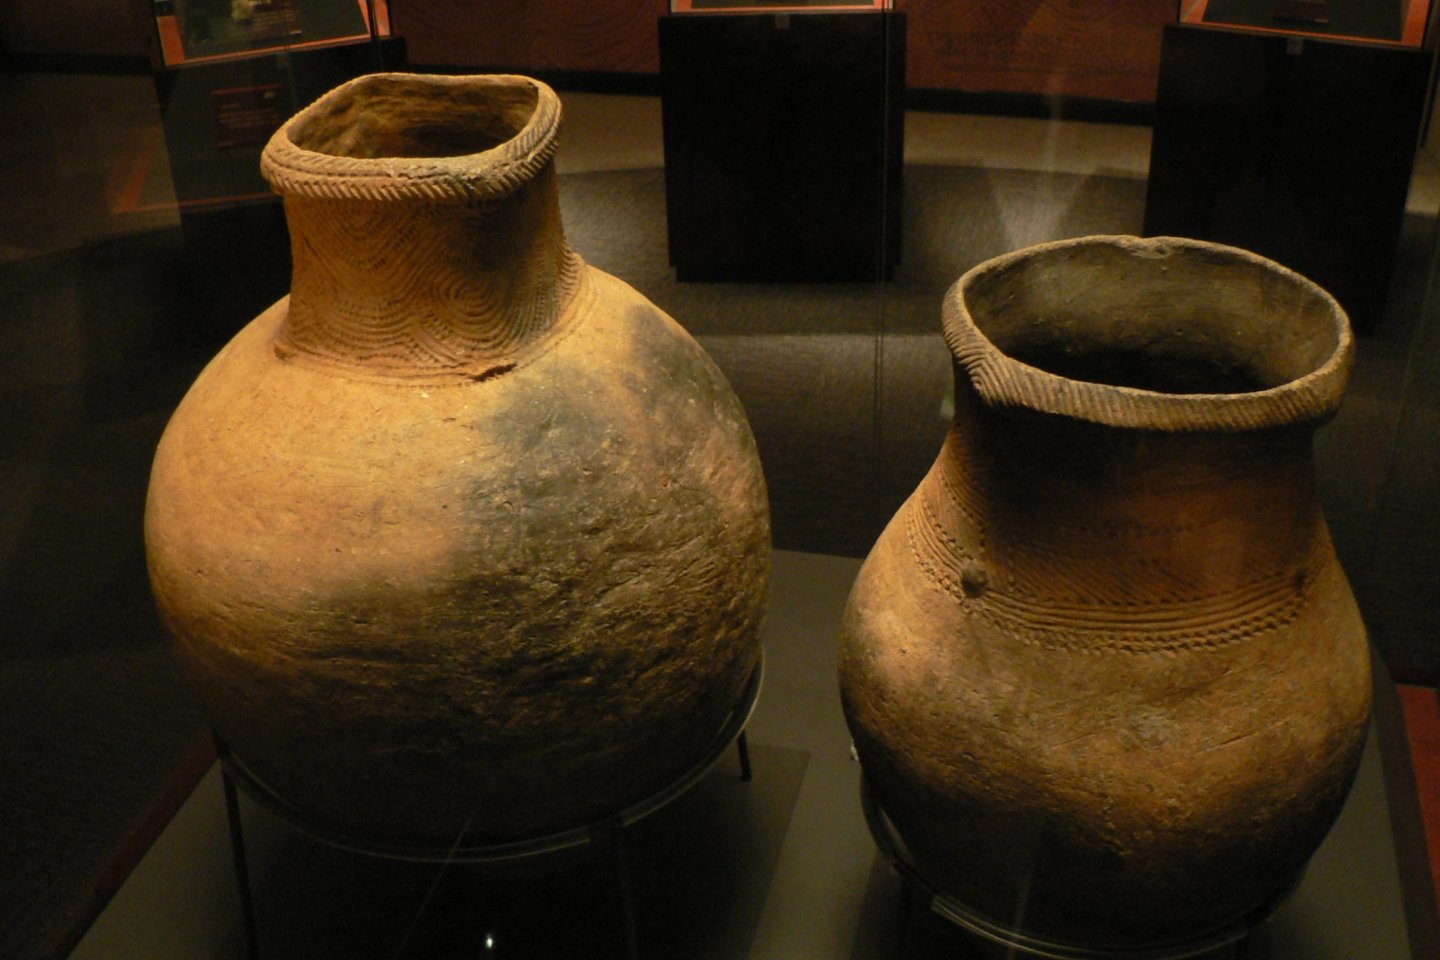 Examples of Jomon period pottery will be on display at the event